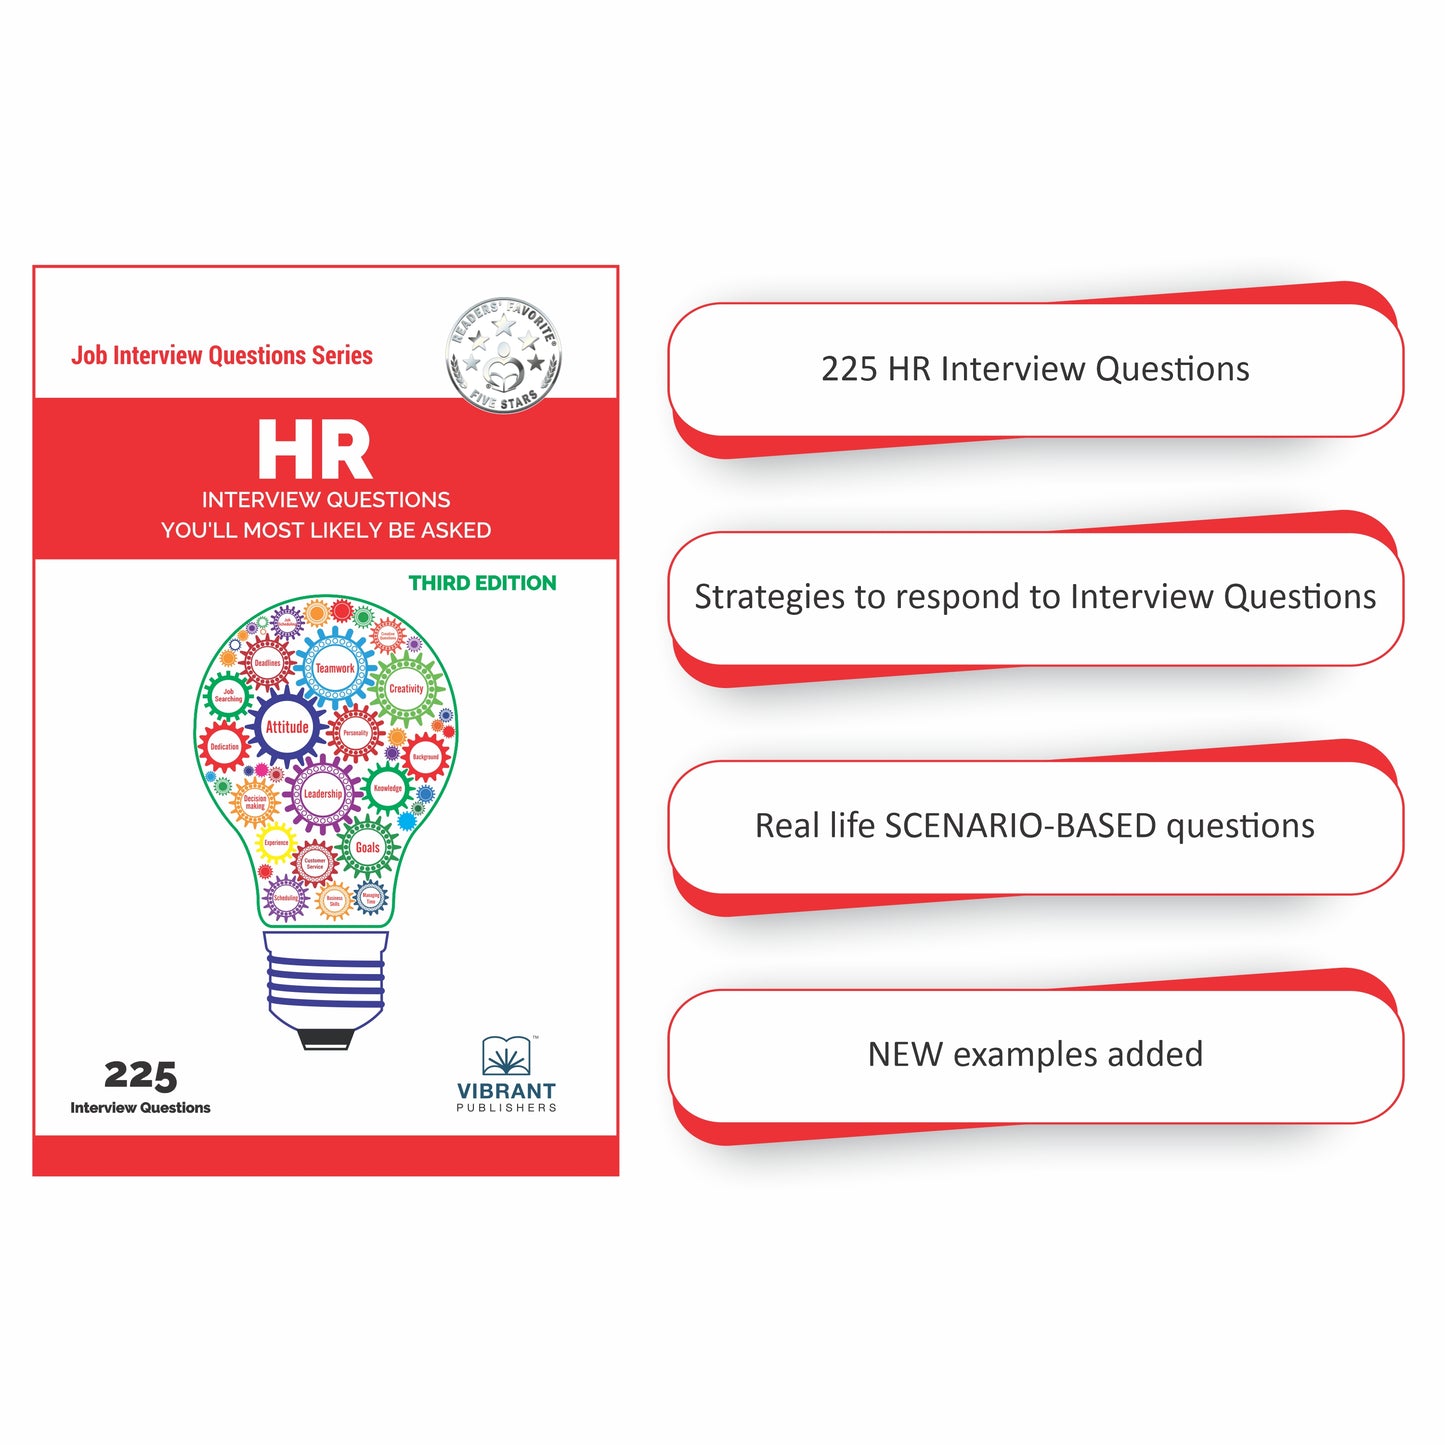 Core Java and HR Interview Questions - Prepare For The Technical and HR Rounds of Your Dream Java Job